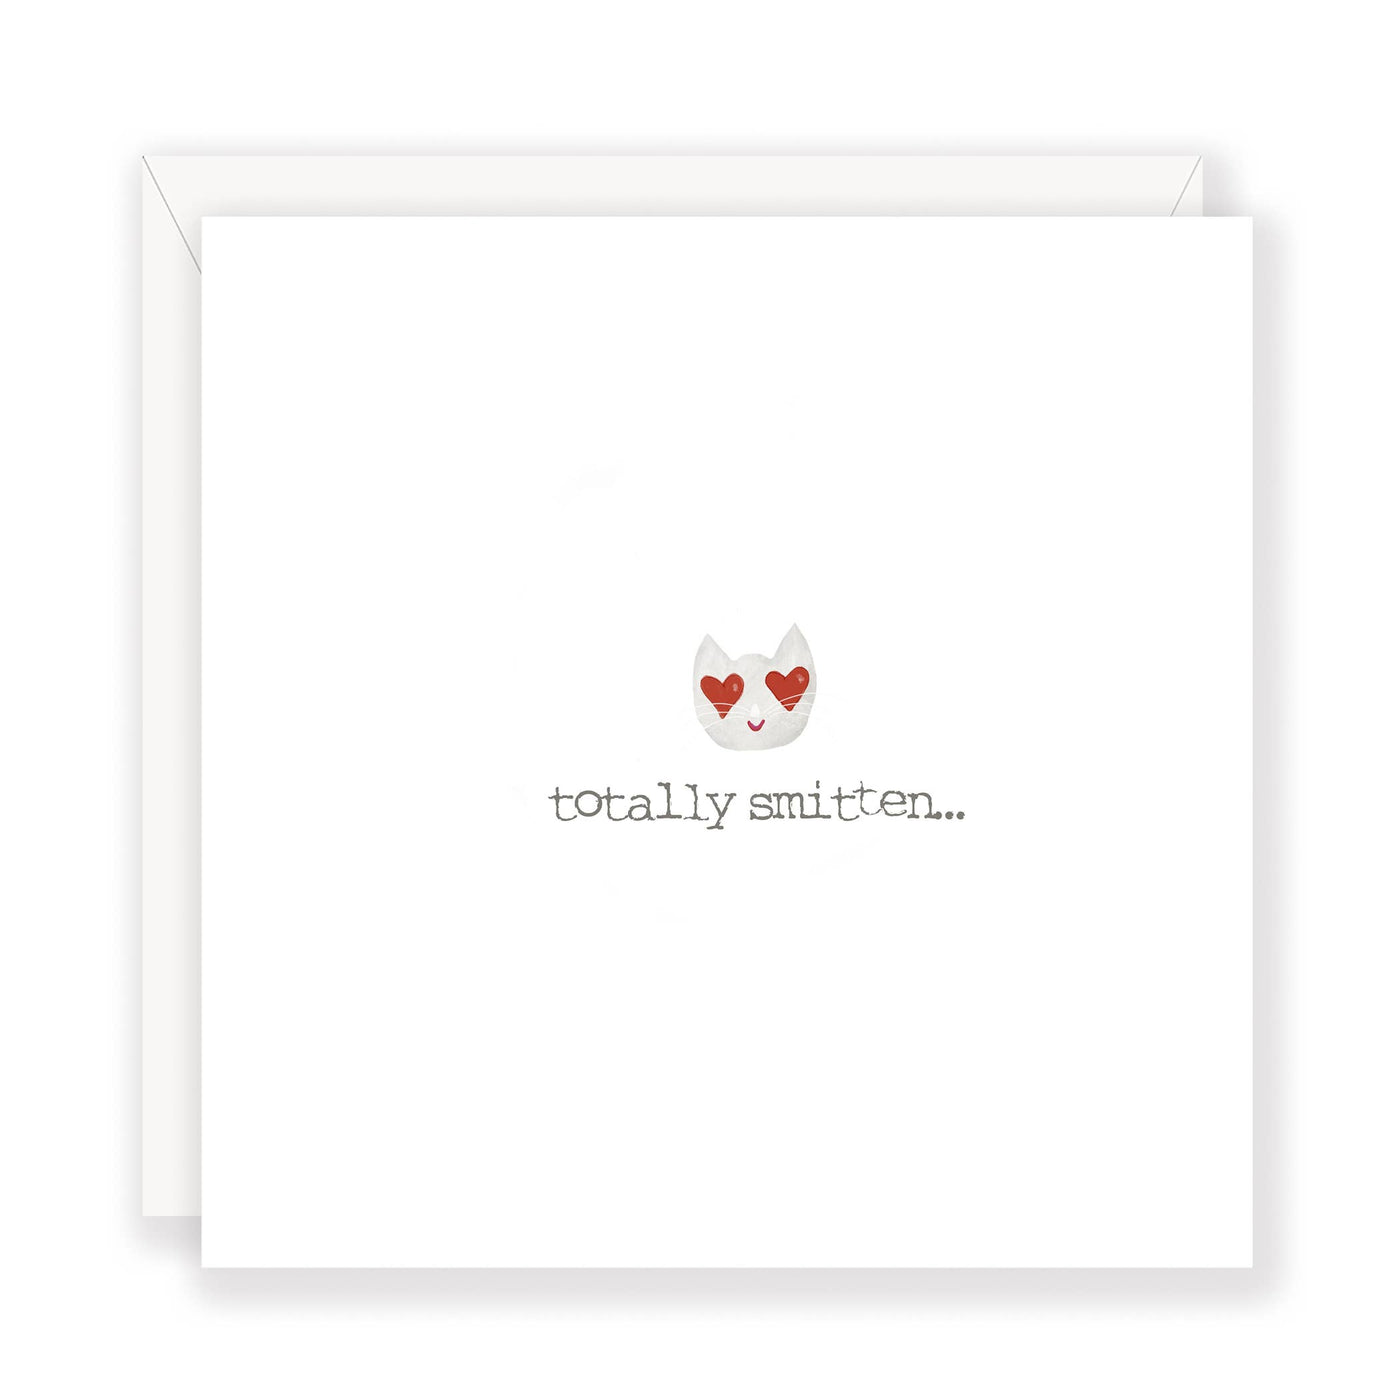 'Totally Smitten' greeting card